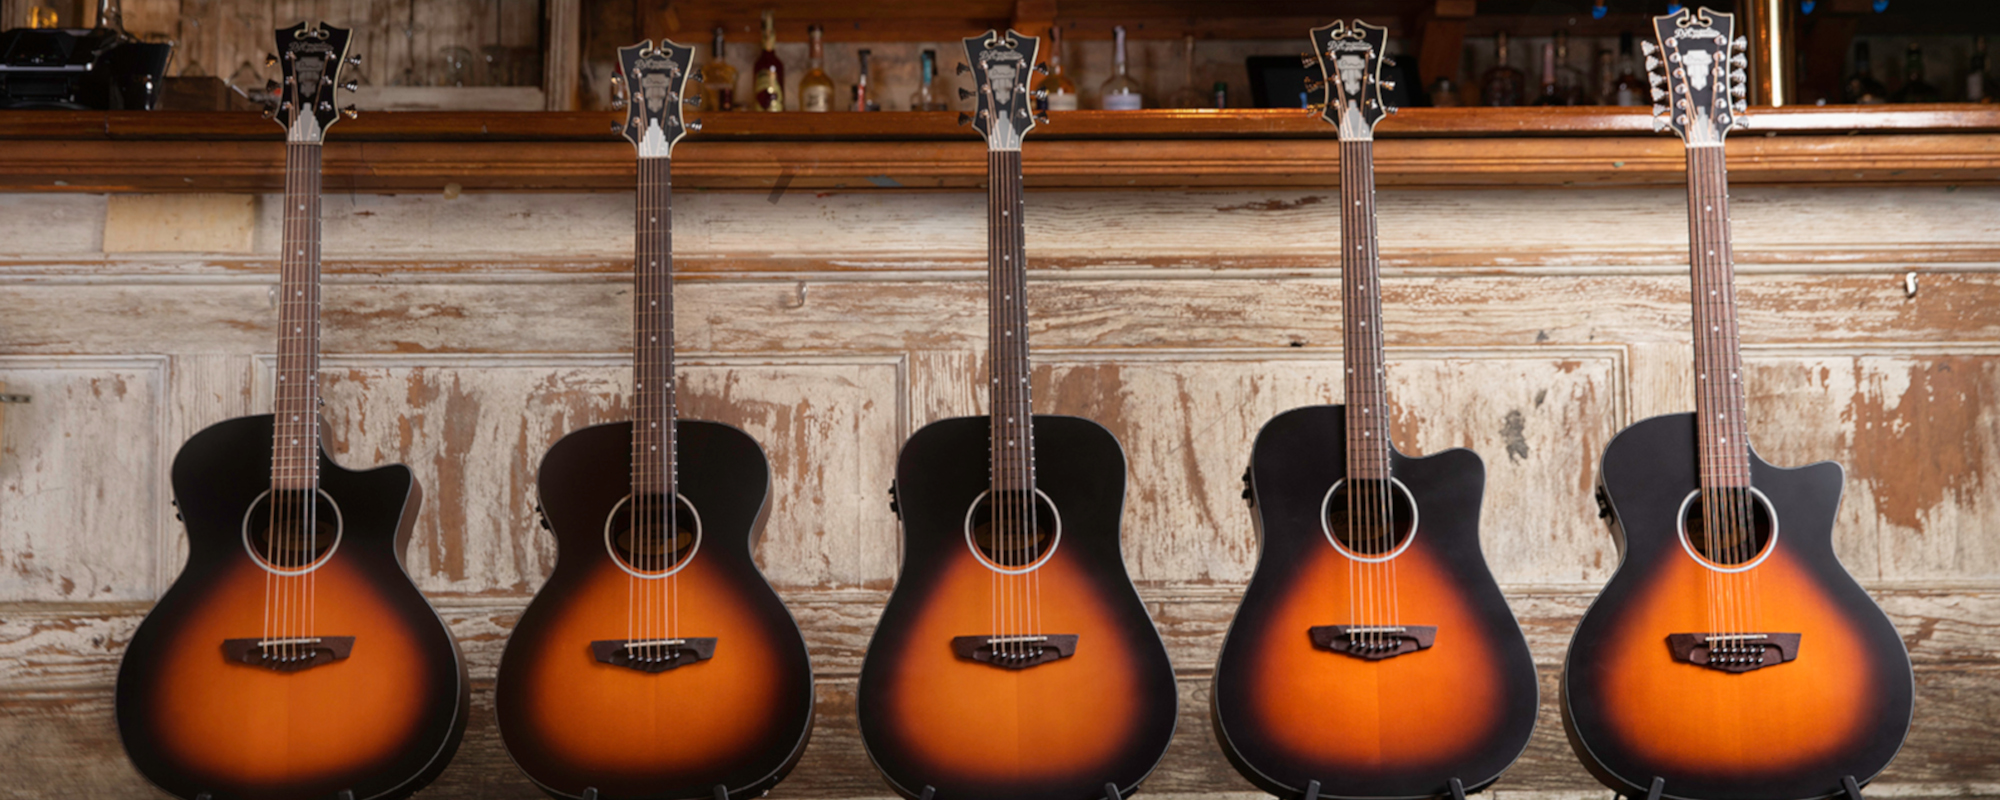 Gear Review: The Return of Two Classic D’Angelico Guitars